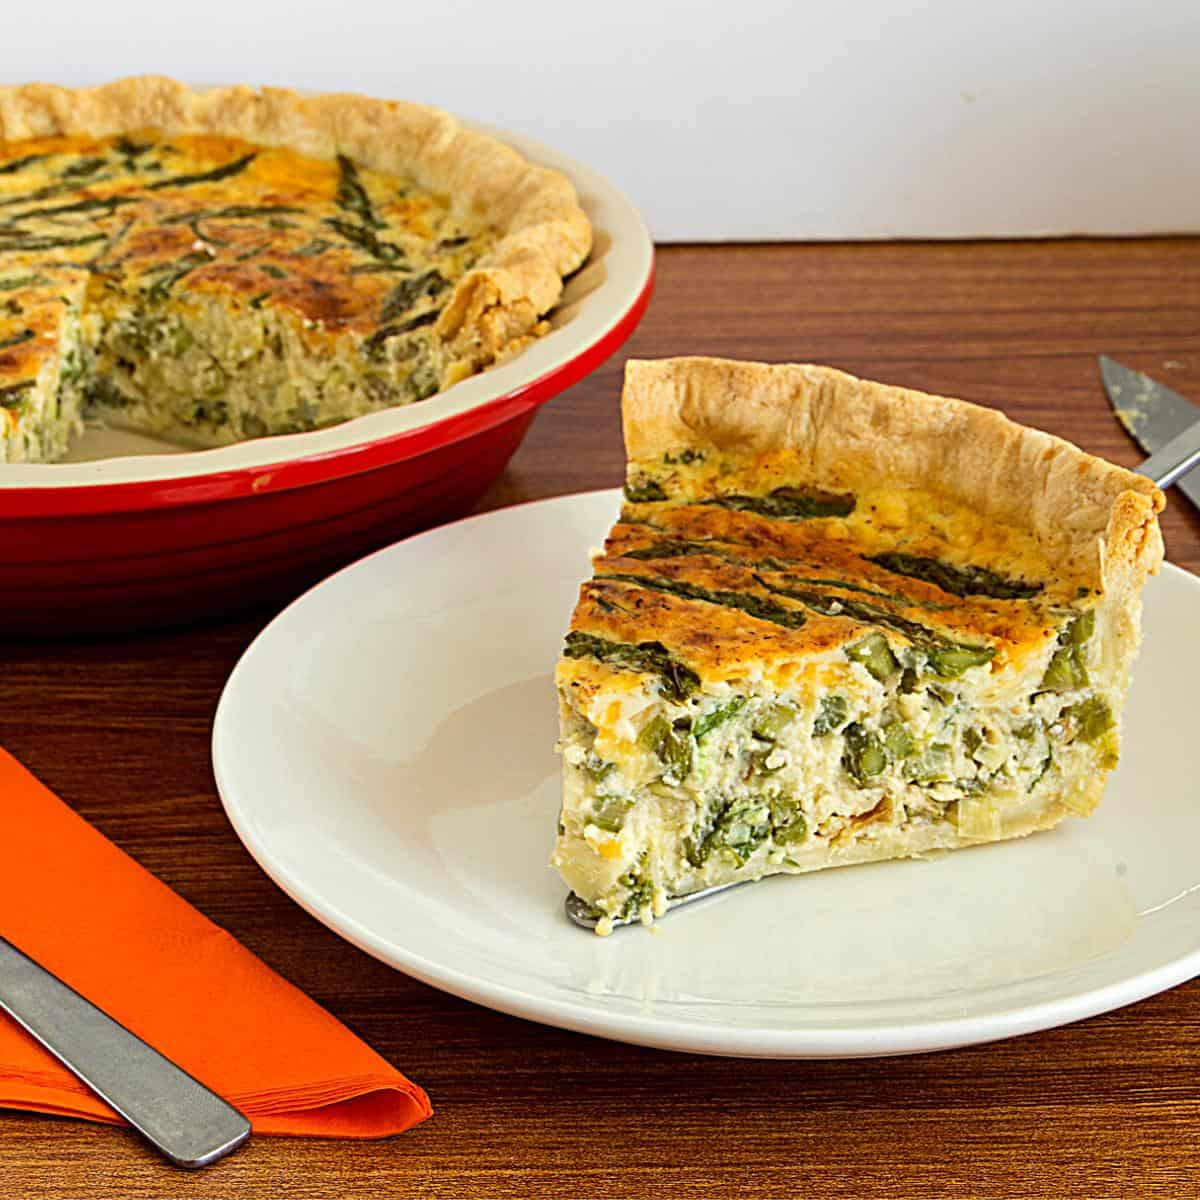 A slice with quiche made with asparagus and leeks.